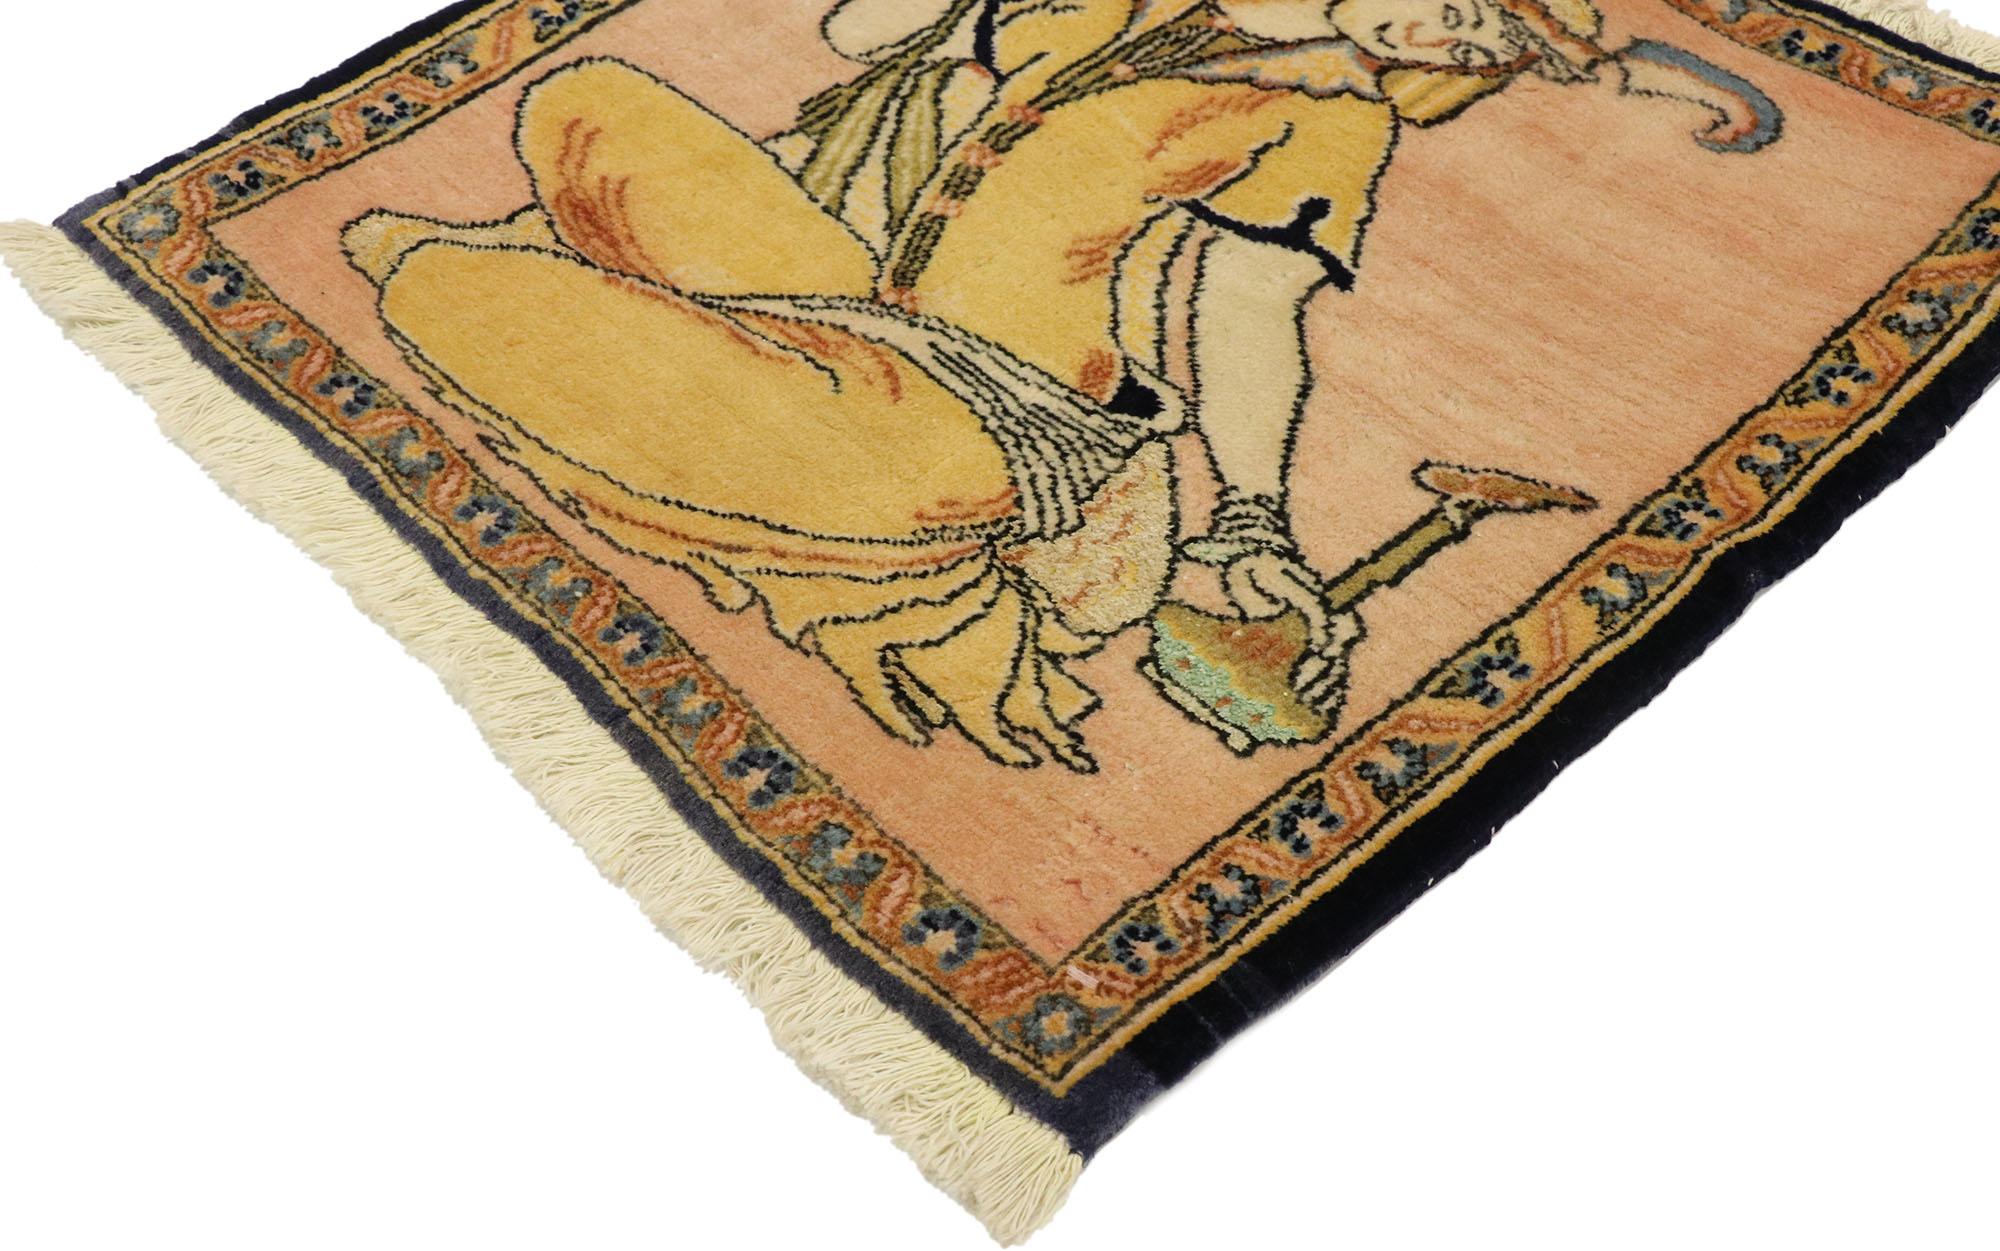 76198, vintage Persian Khamseh Pictorial rug with Dervish Scene, Persian wall hanging. Ancient Persia boasts the true origin of viticulture and wine drinking as celebrated in this hand knotted wool vintage Persian Khamseh pictorial rug. Tender and